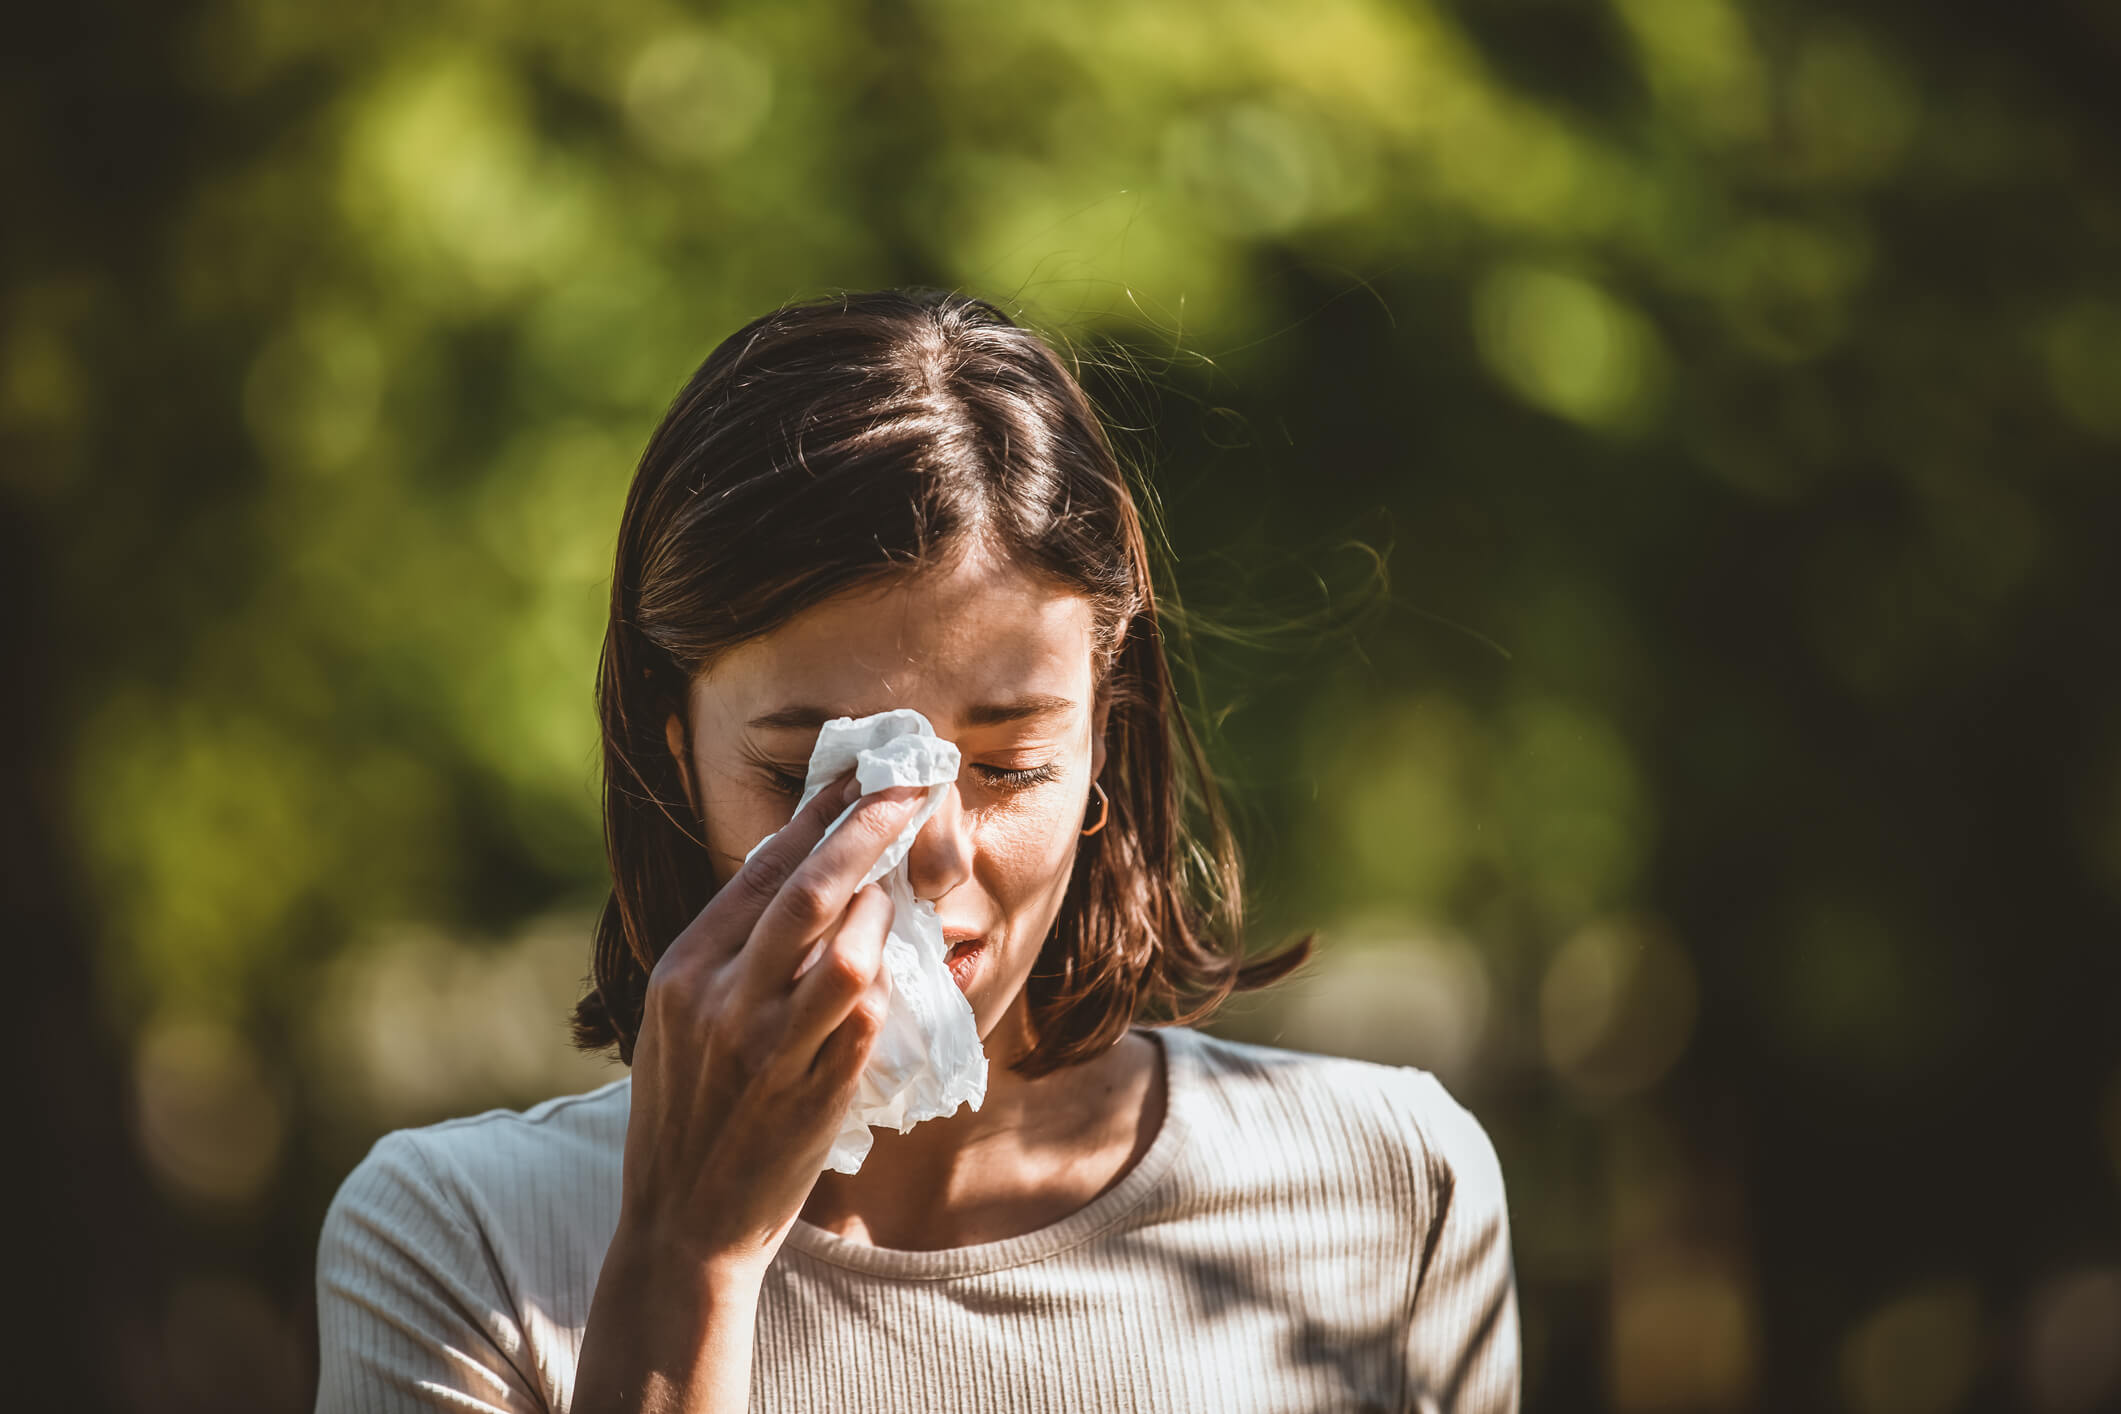 Is there a link between seasonal allergies and dry eyes?